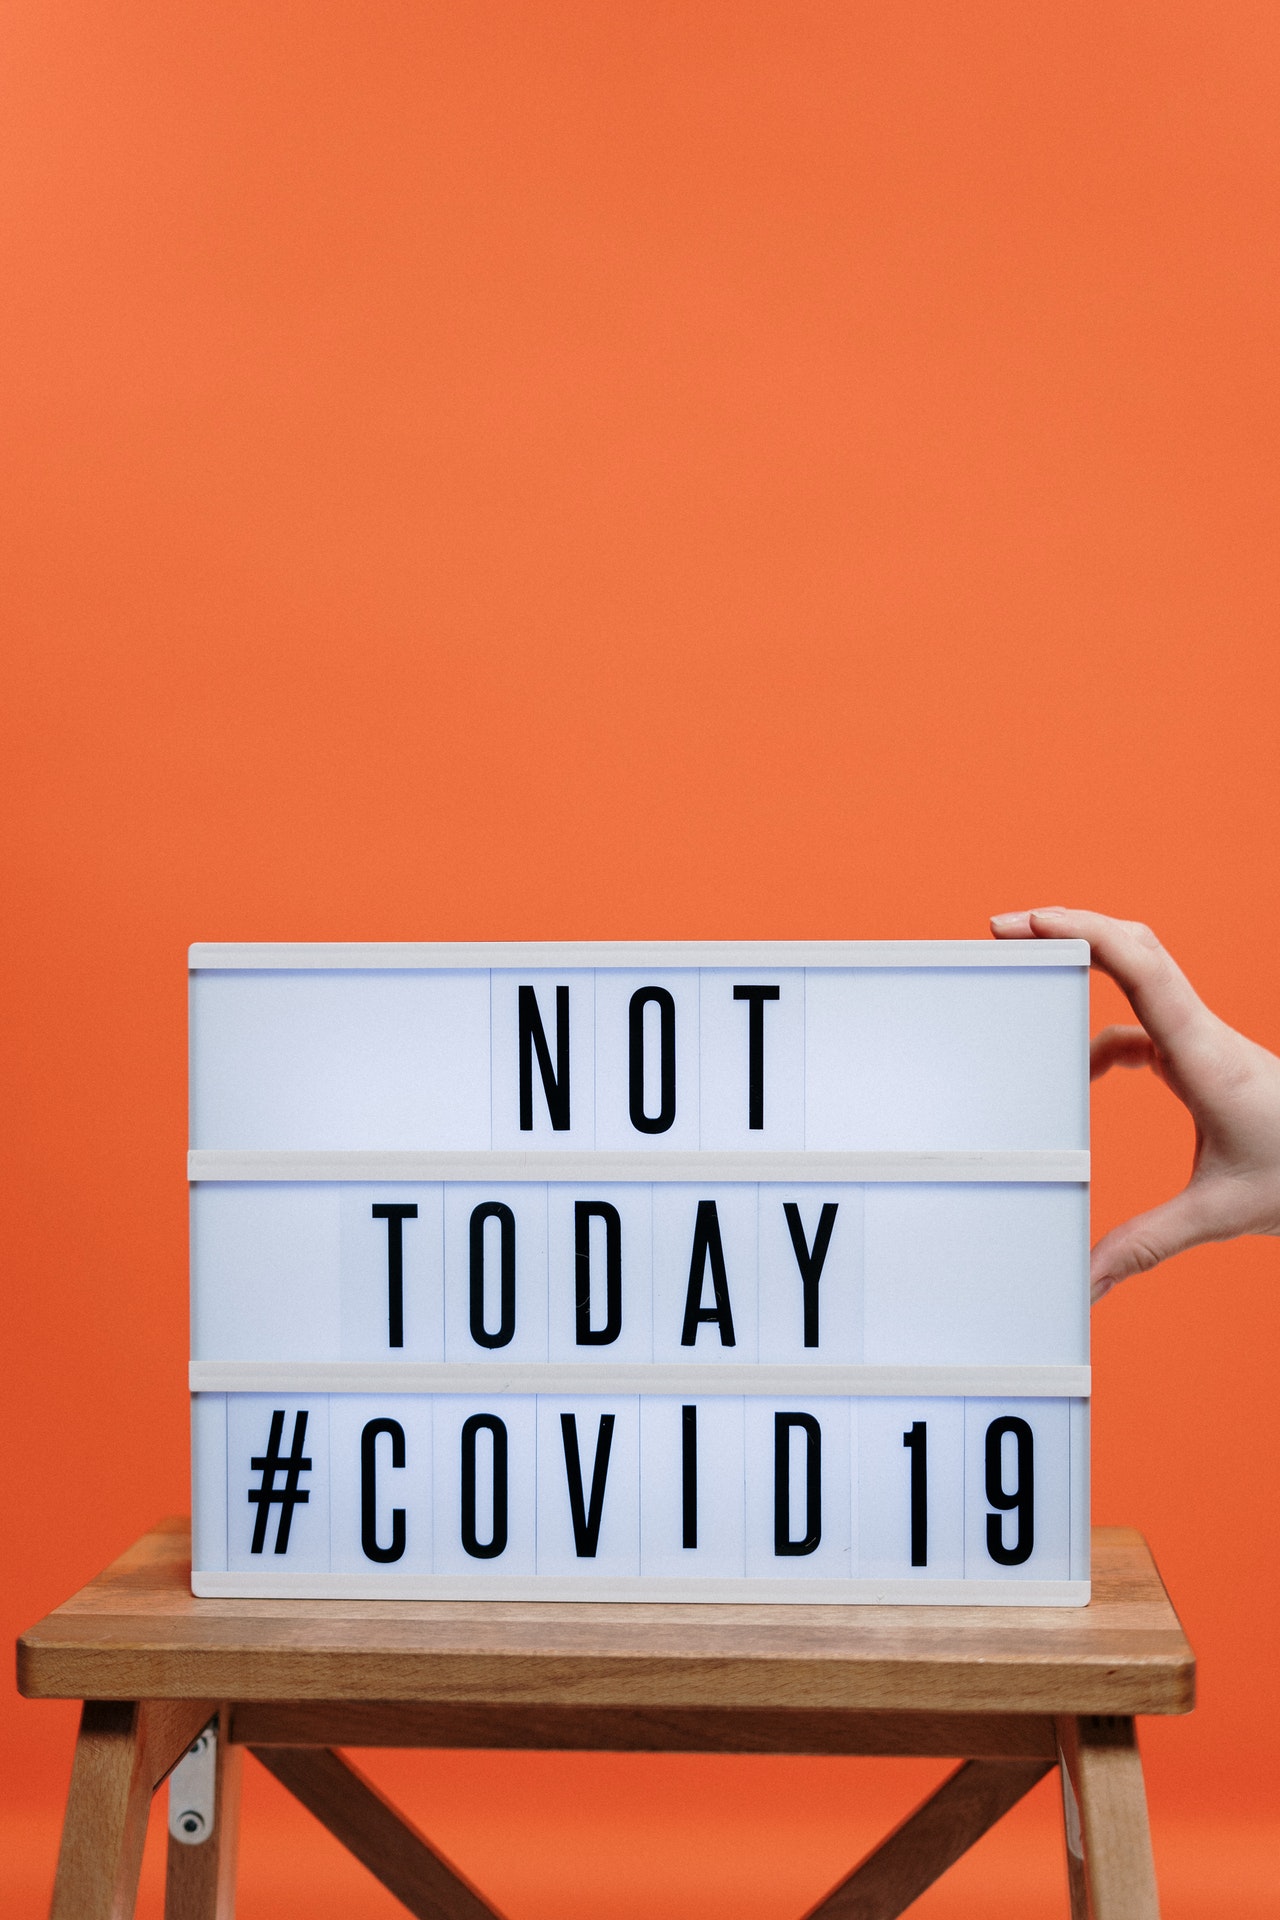 businesses-facing-battle-against-covid-19